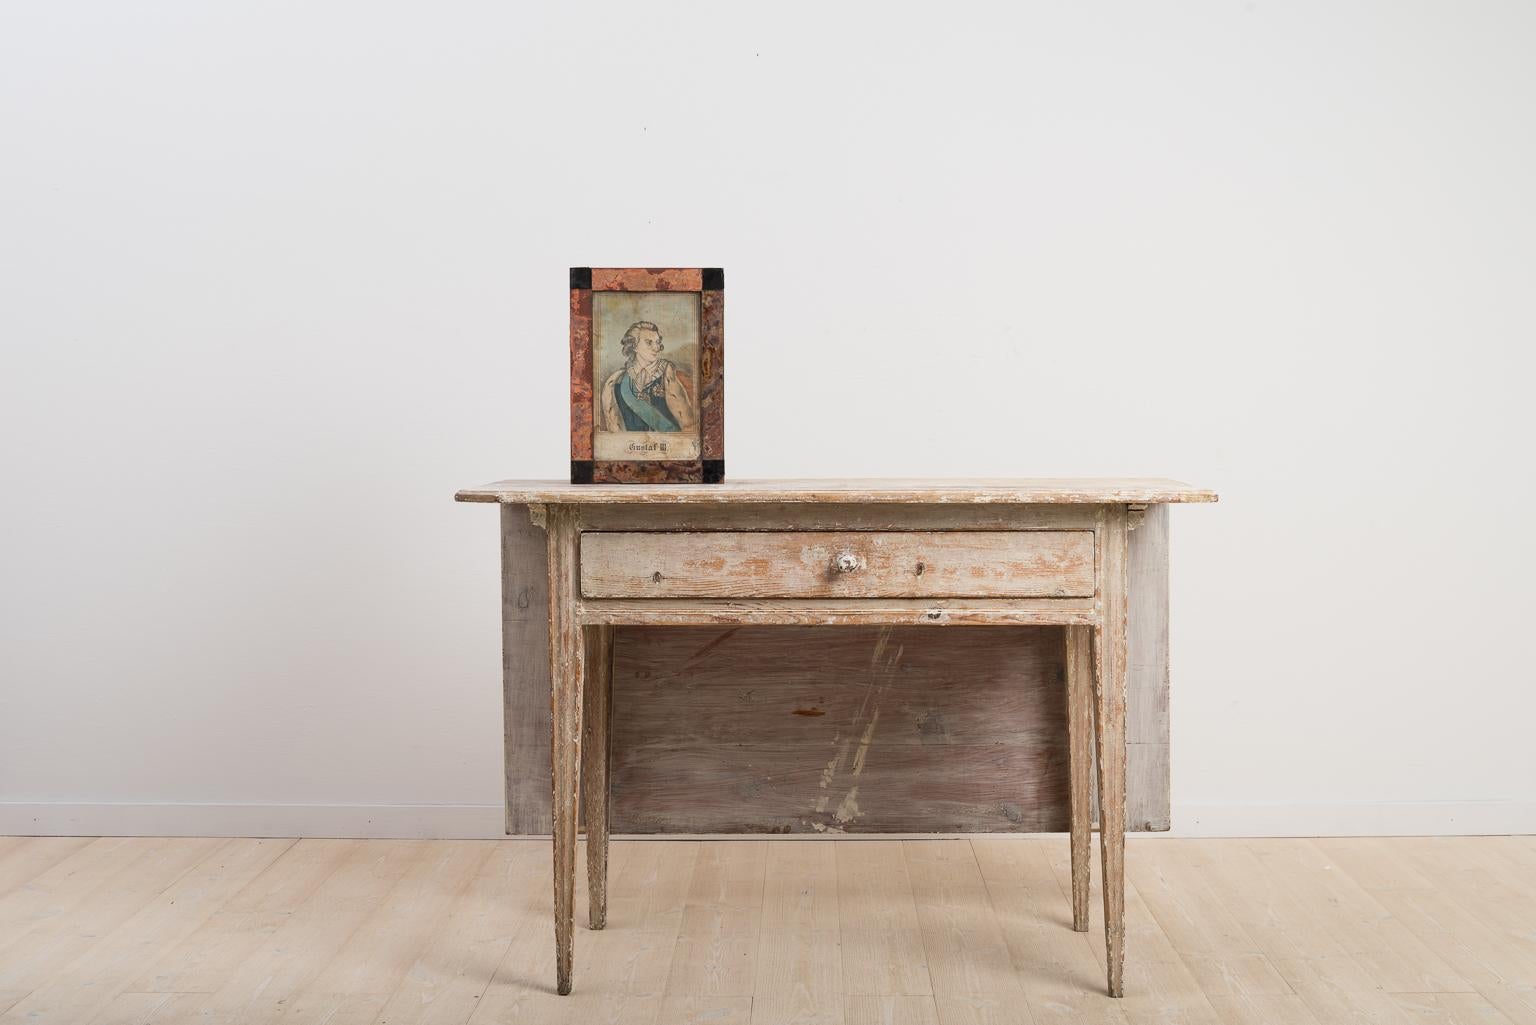 Provincial Gustavian desk with straight tapered legs manufactured around the turn of the century 1700-1800. The table is the 18th century’s solution to compact living as ut can be used as a desk, side table and a dining room table. The tables were